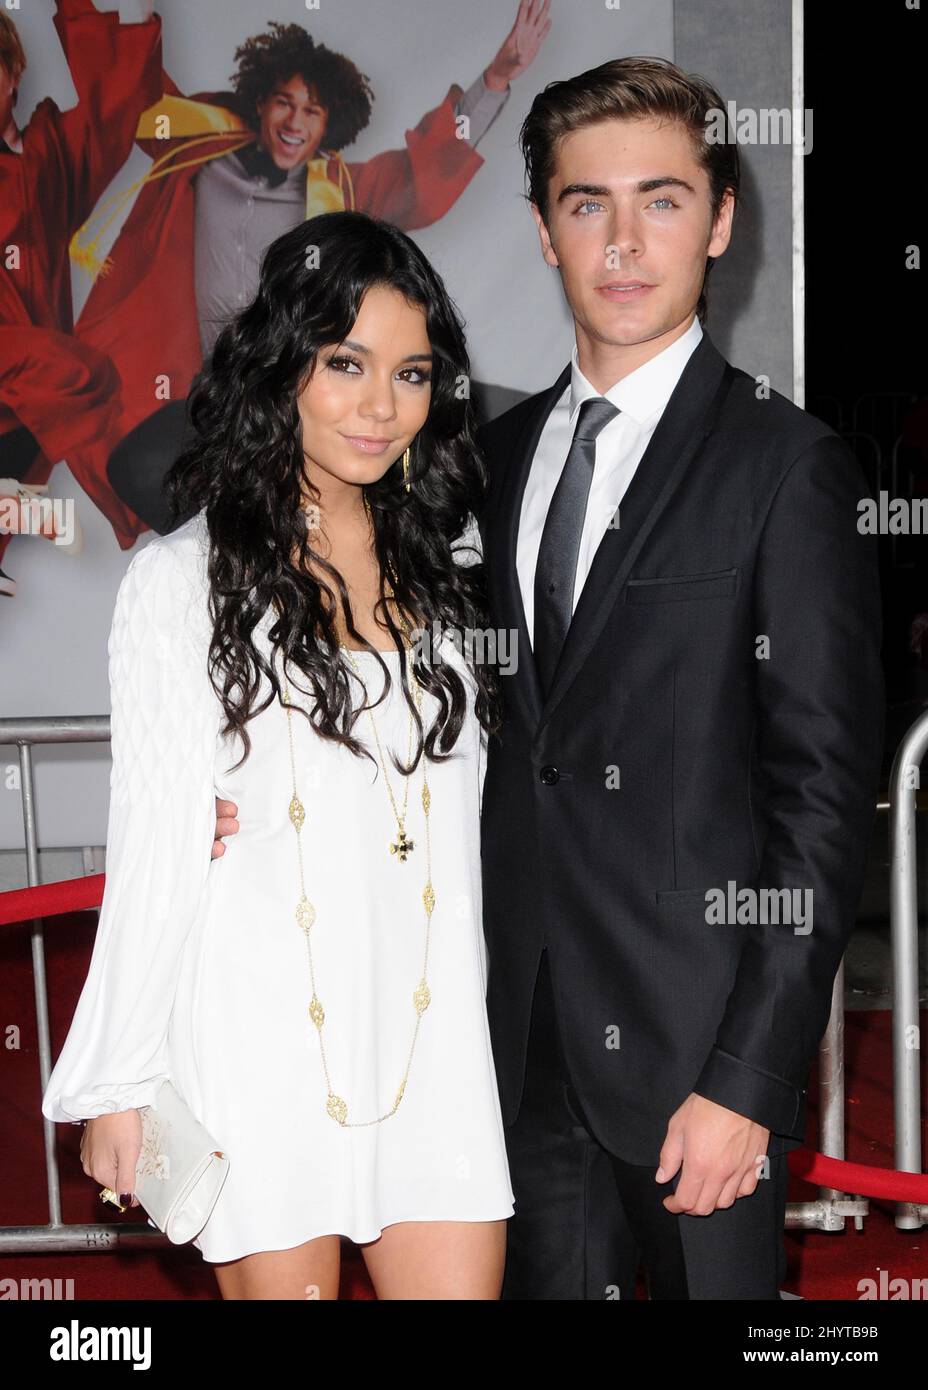 Vanessa Hudgens and Zac Efron at the High School Musical 3 Premiere held at the Galen Center, University Of Southern California, Los Angeles. Stock Photo